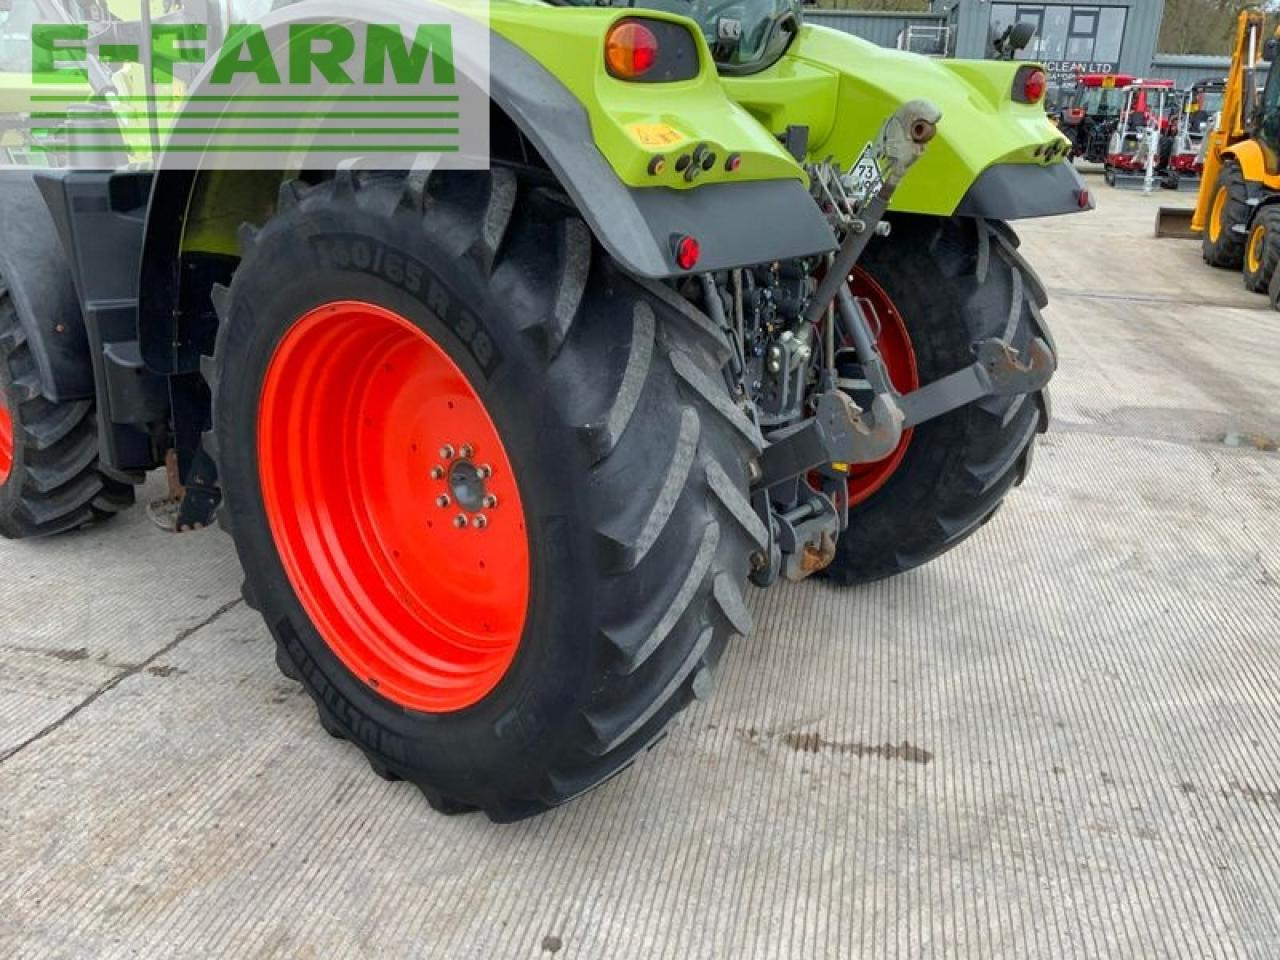 Farm tractor CLAAS 510 arion tractor (st19410)